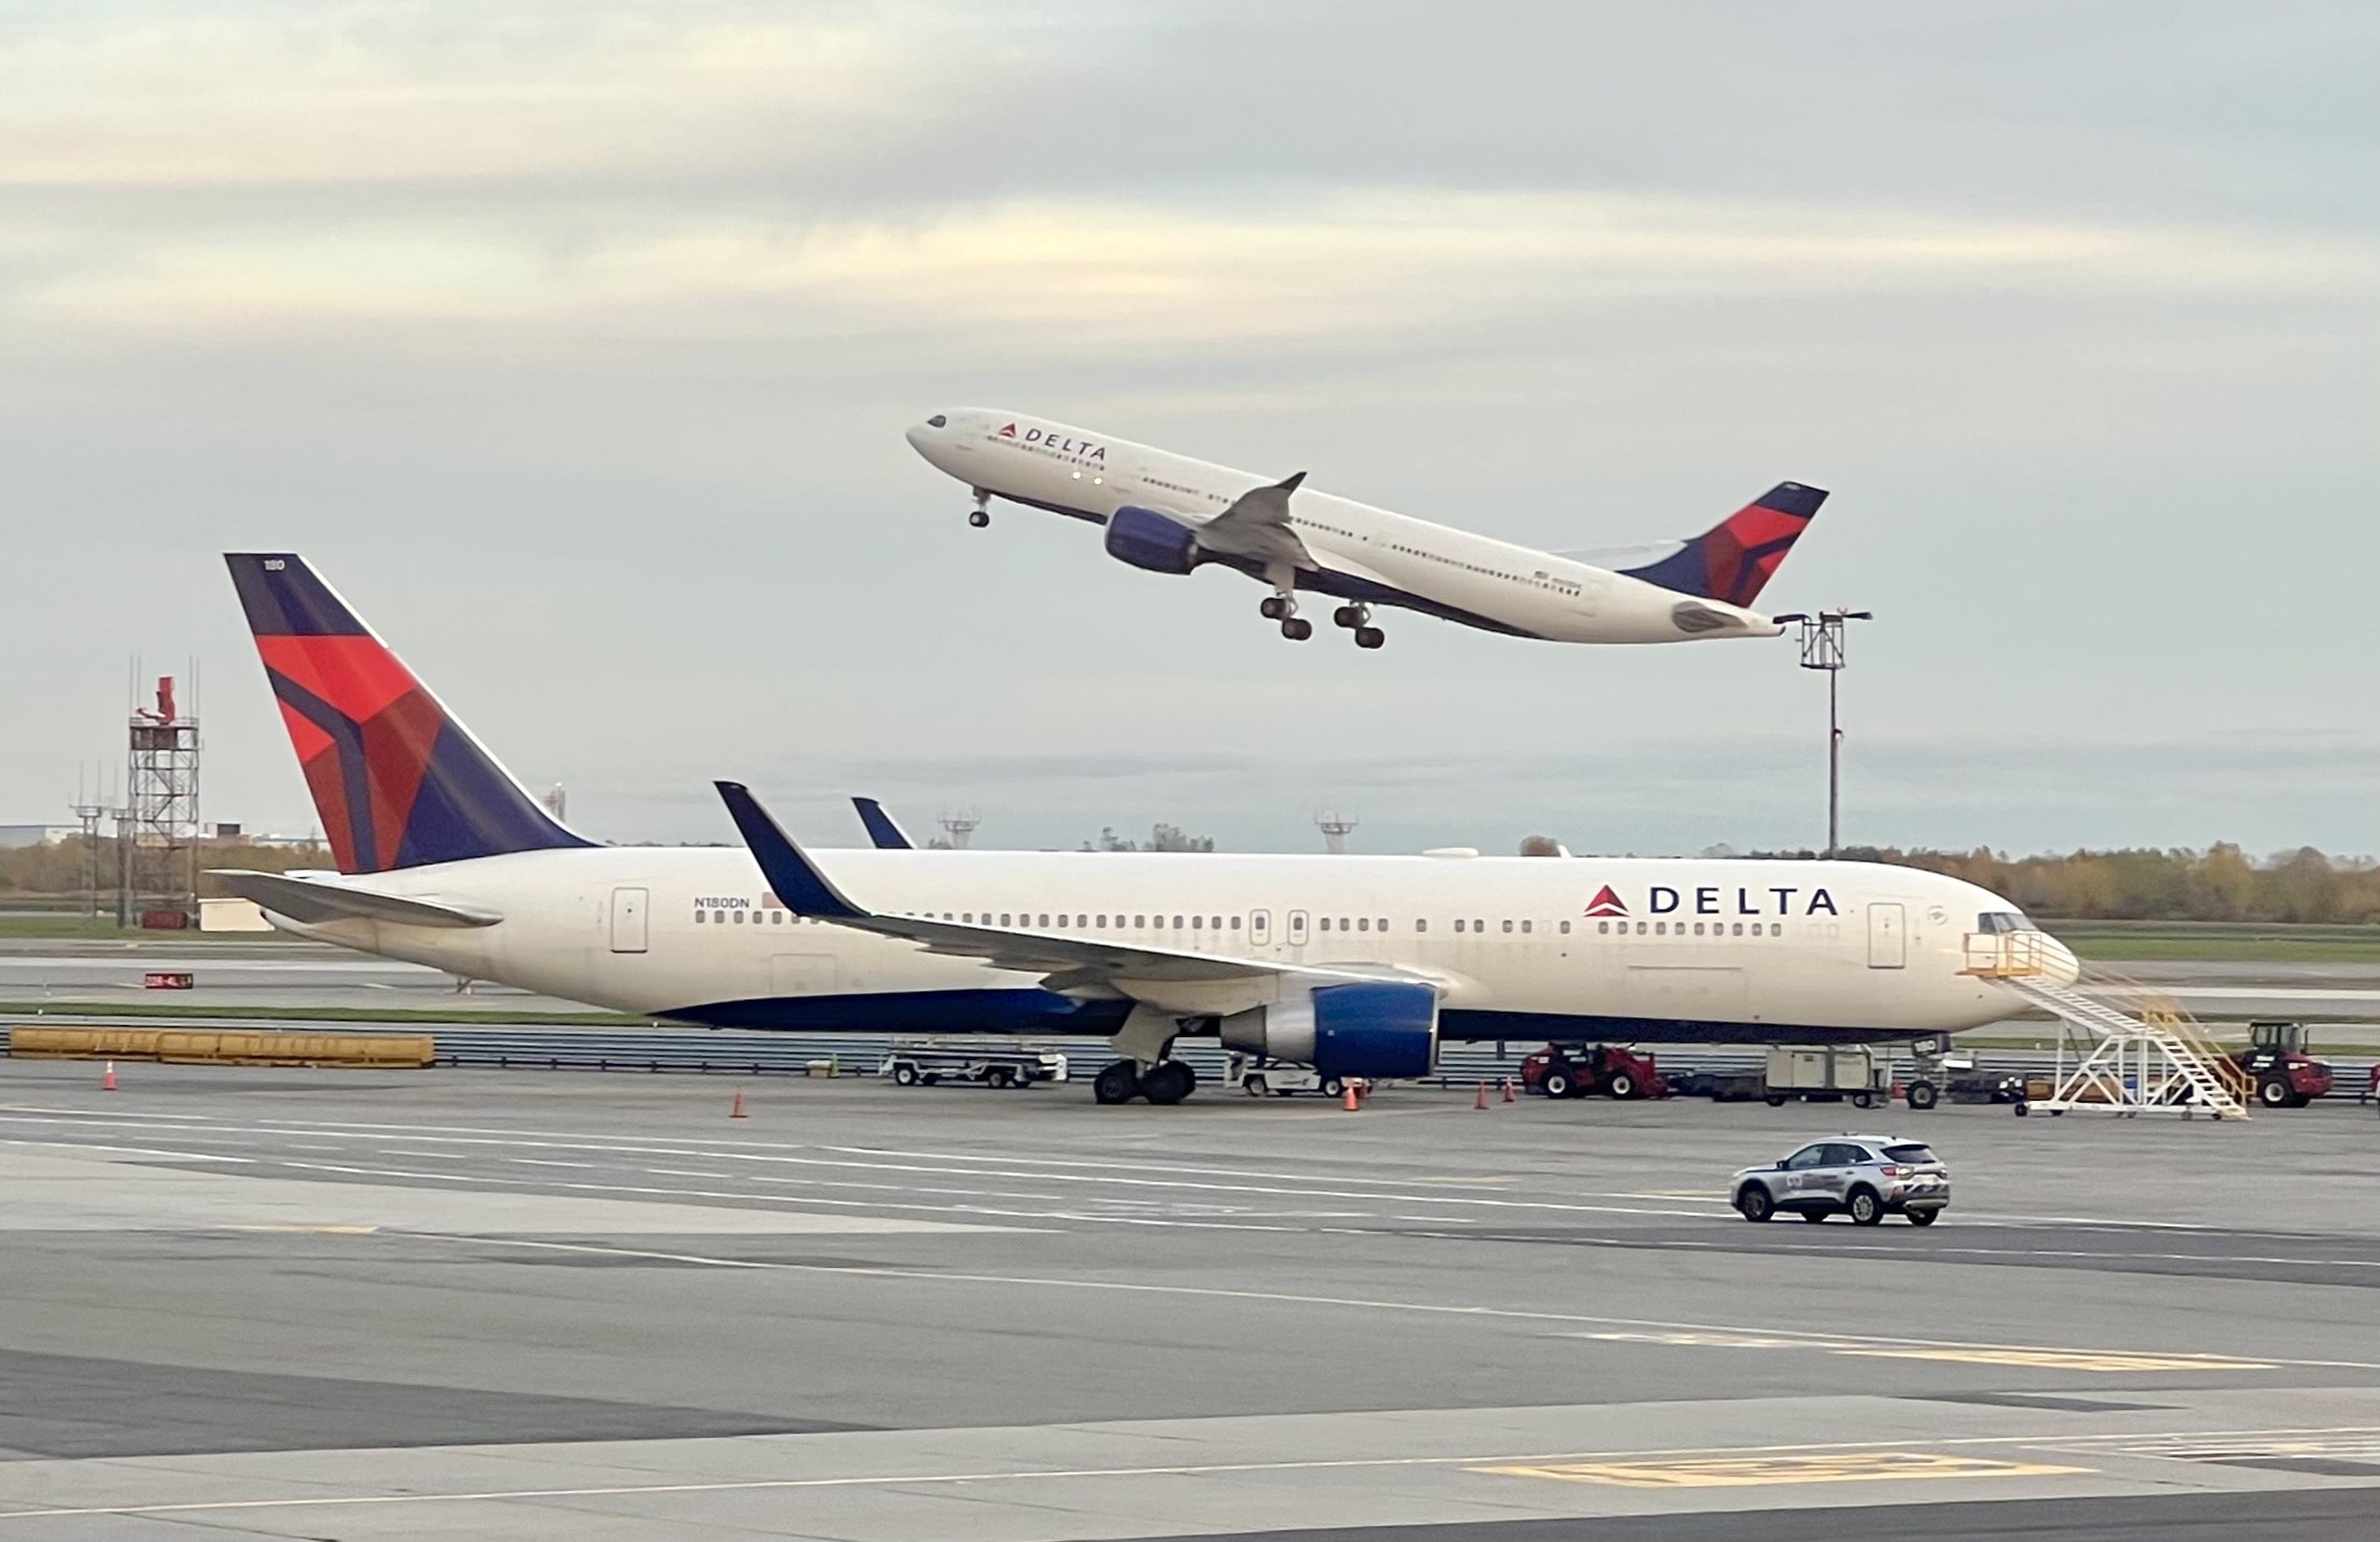 Delta Boeing 767 and Airbus A330 at JFK